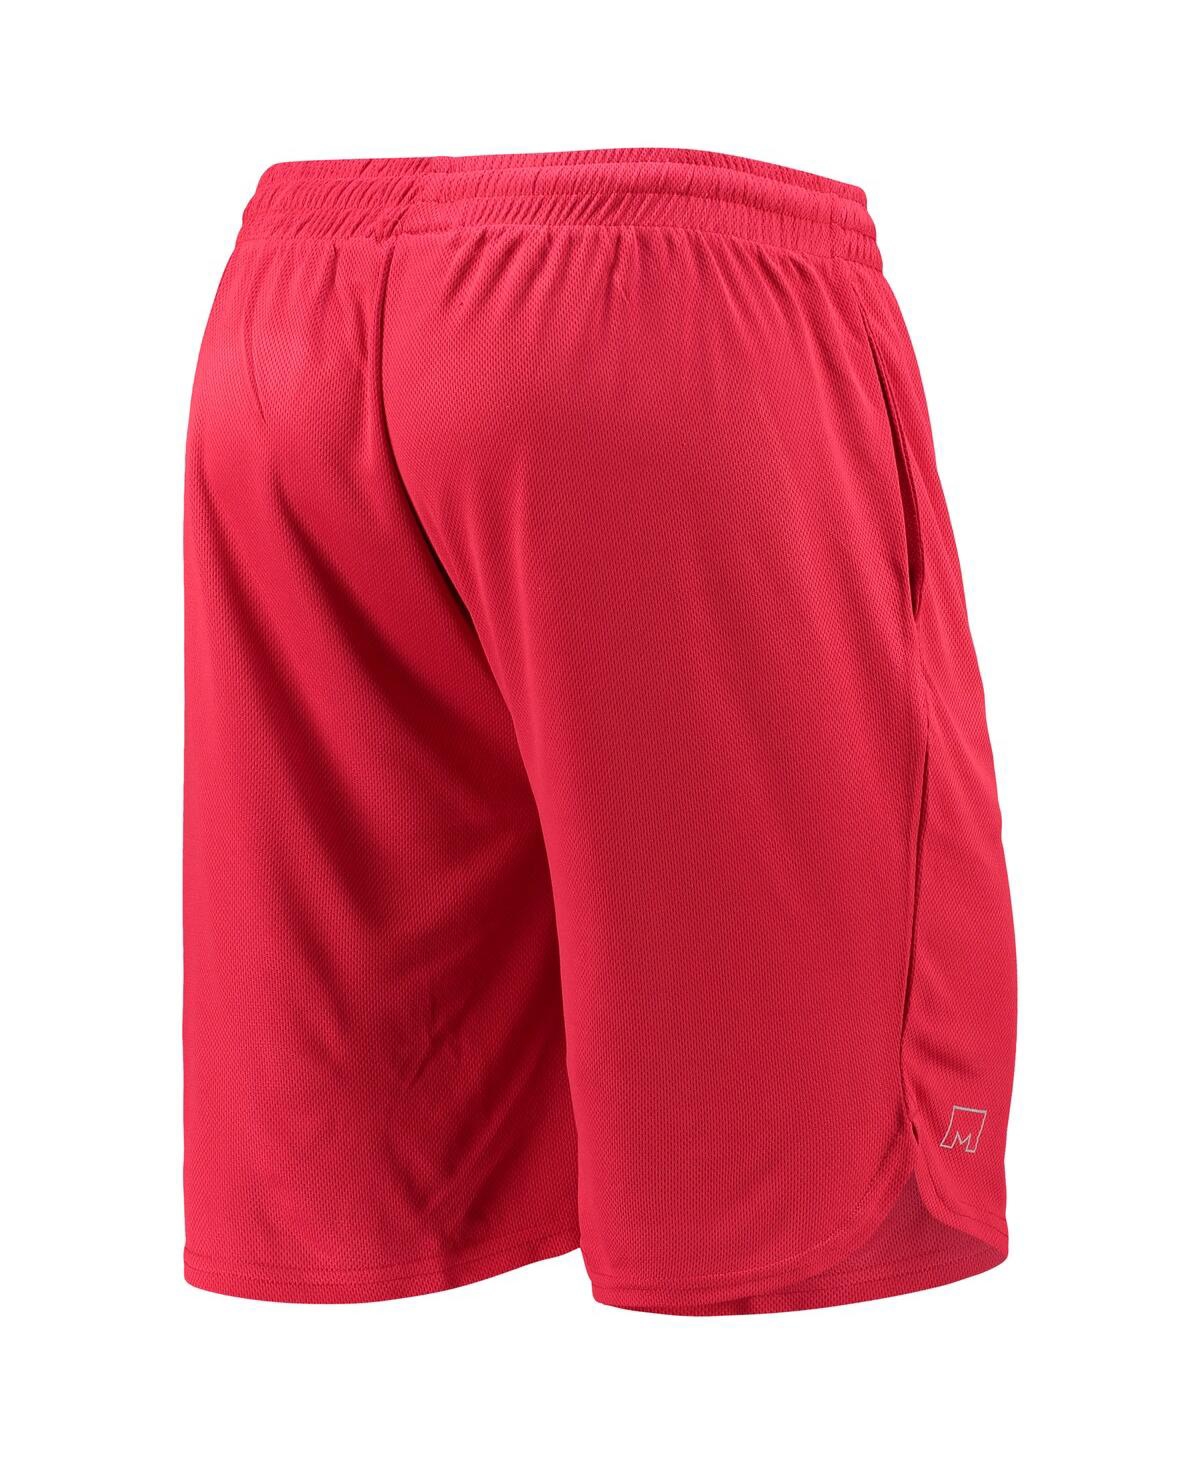 Shop Msx By Michael Strahan Men's  Red Tampa Bay Buccaneers Training Shorts